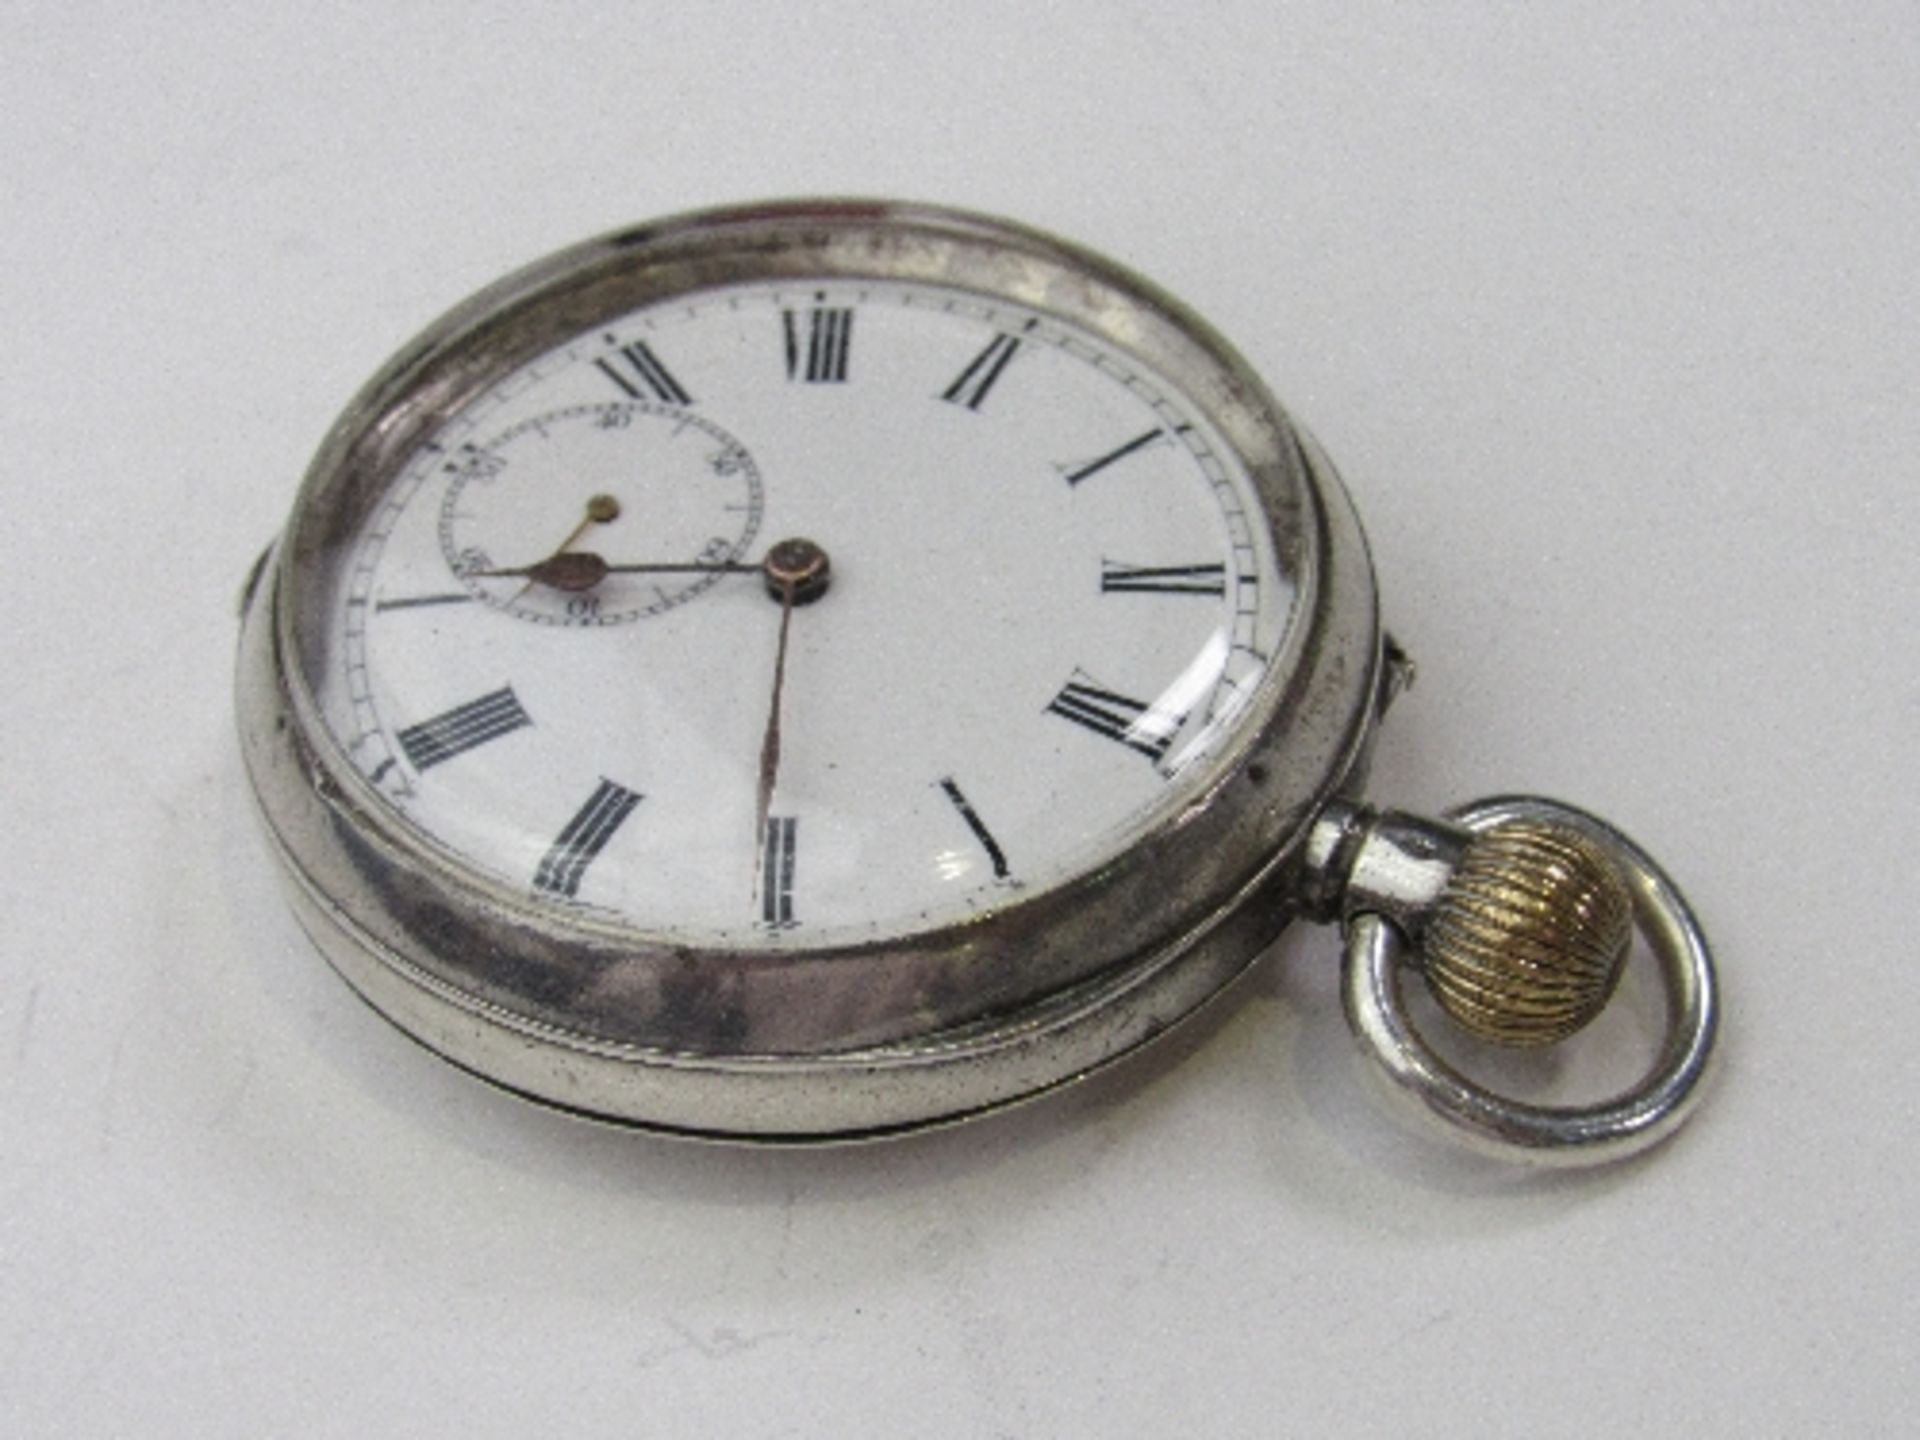 935 silver Swiss made pocket watch with white face & Roman numerals. Estimate £35-50. - Image 2 of 5